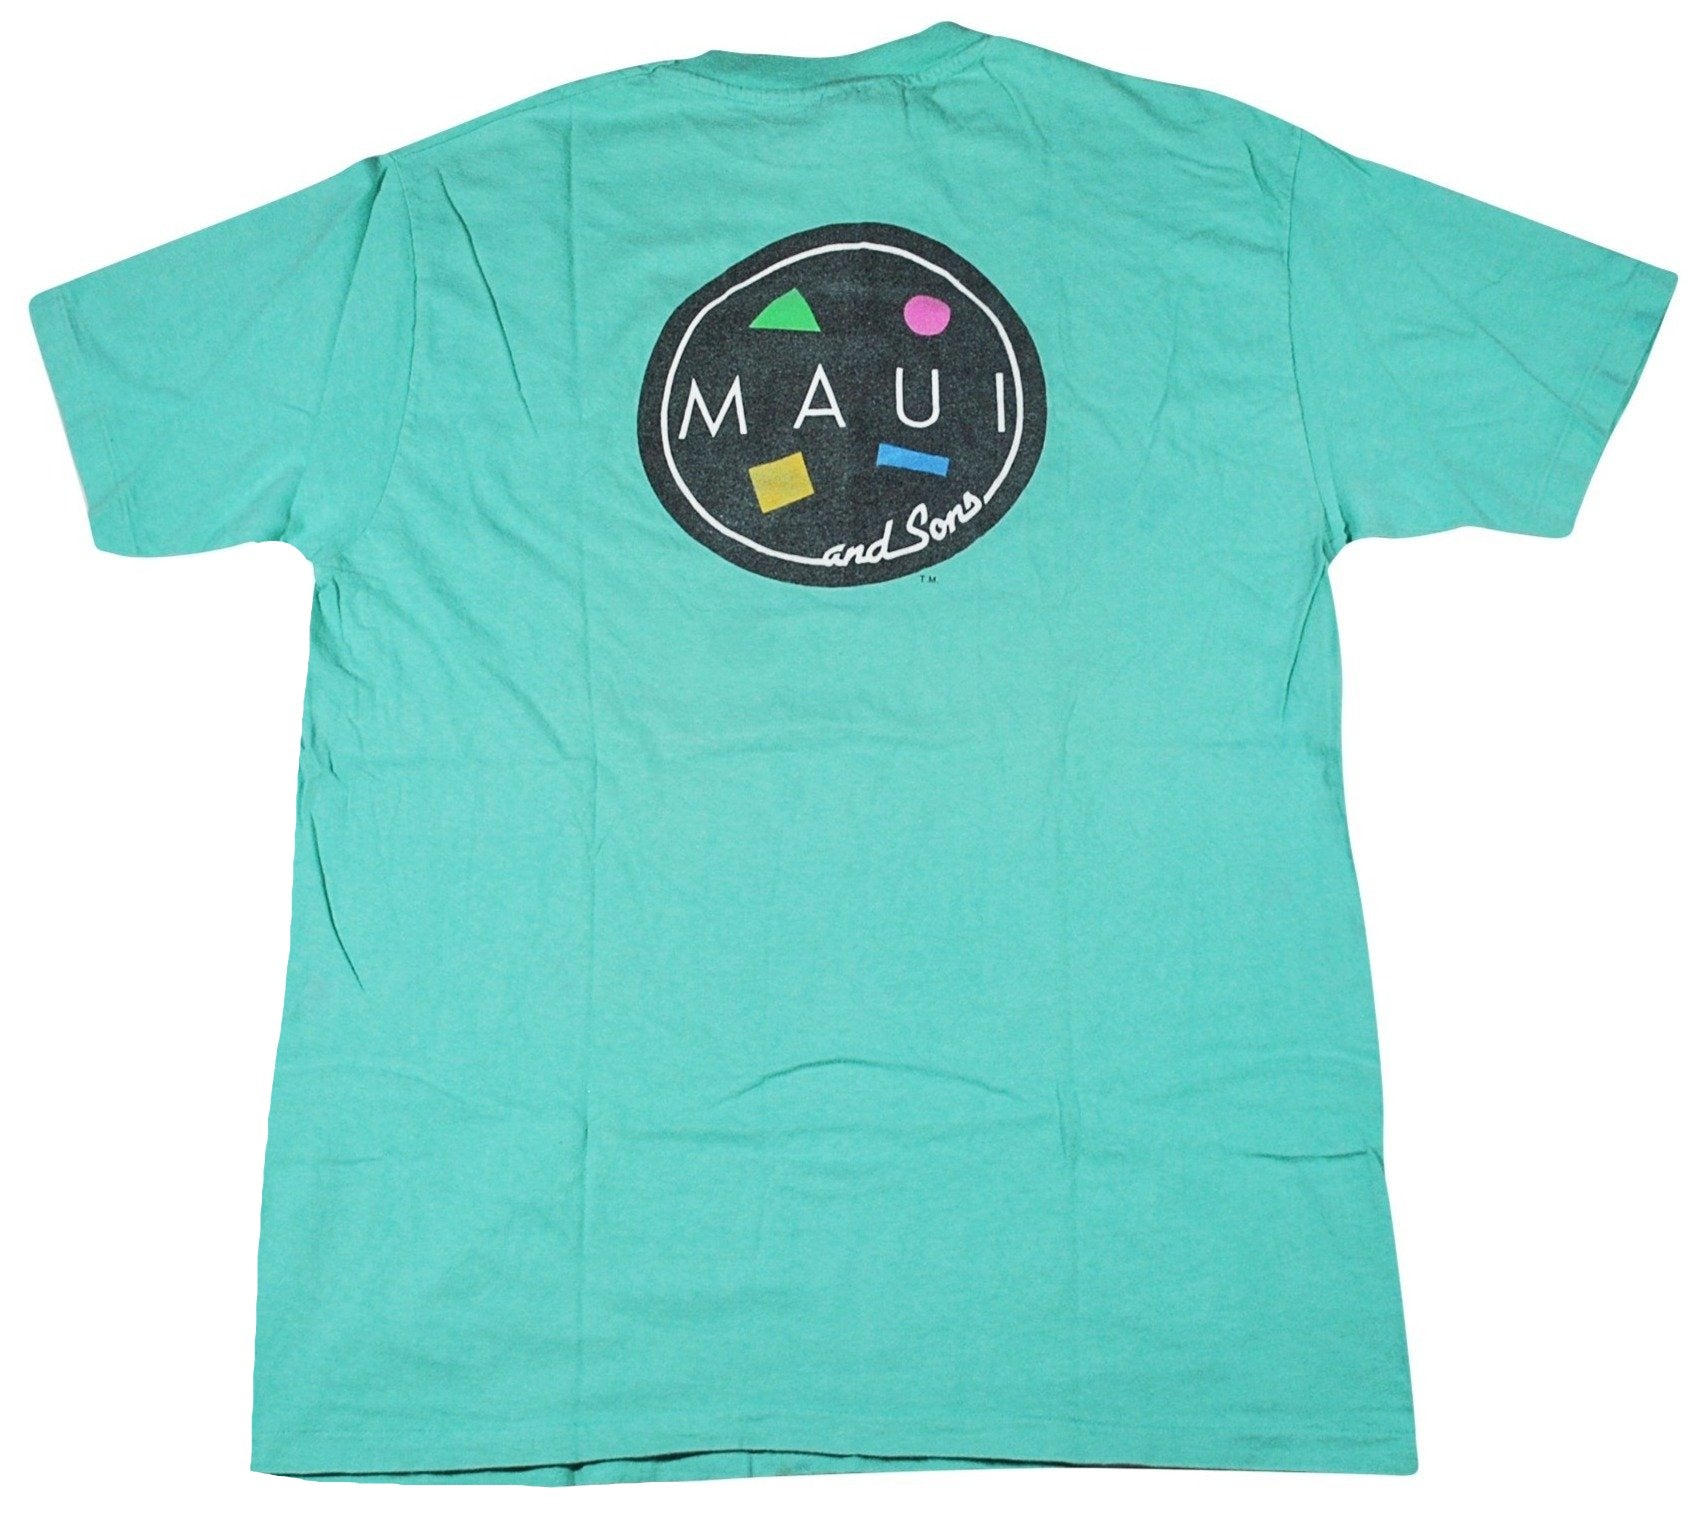 Maui and Sons 80s Shirt Size X-Large – Yesterday's